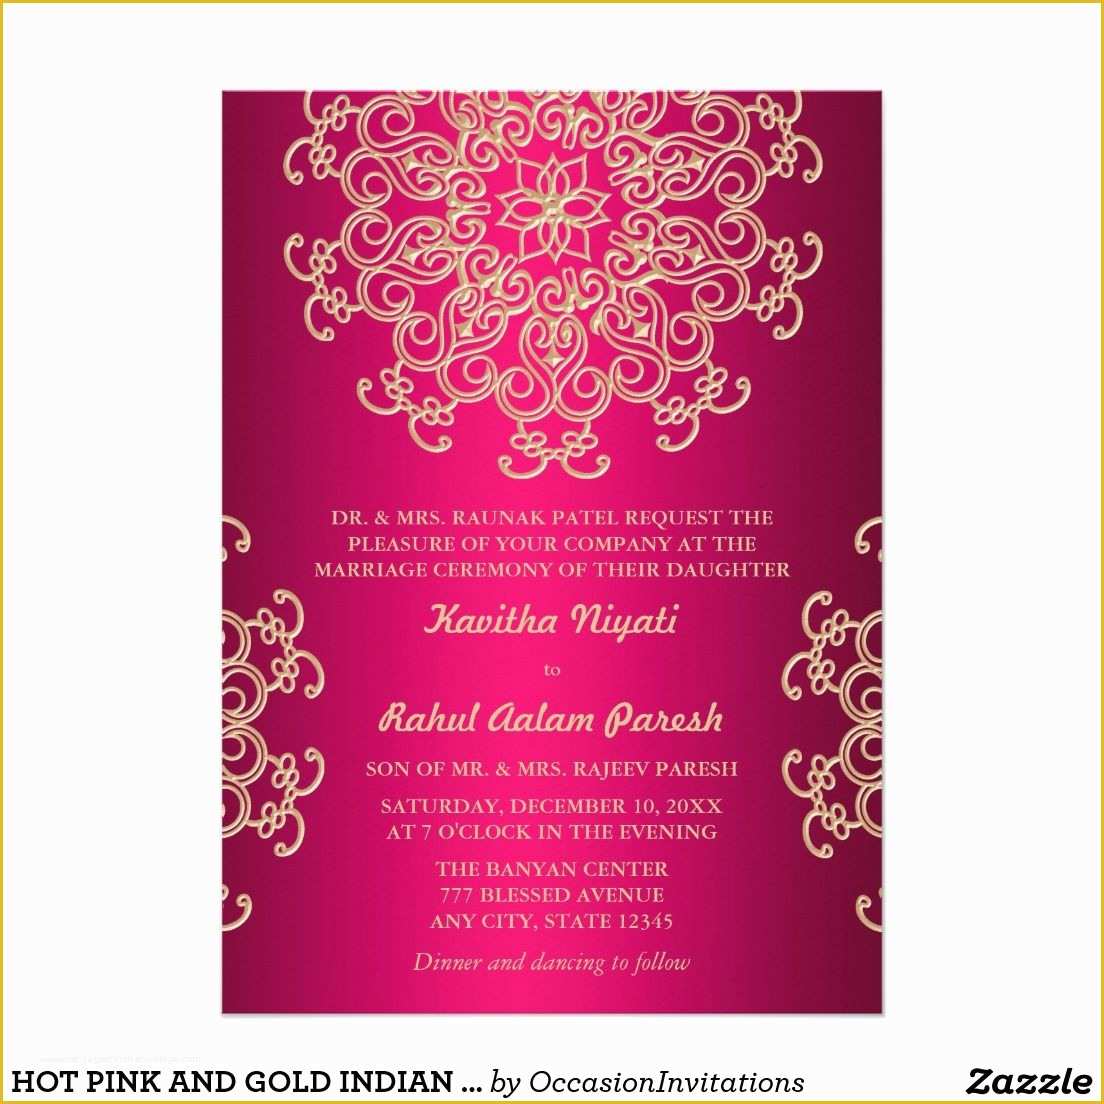 Indian Engagement Invitation Cards Templates Free Download Of Hot Pink and Gold Indian Style Wedding Invitation